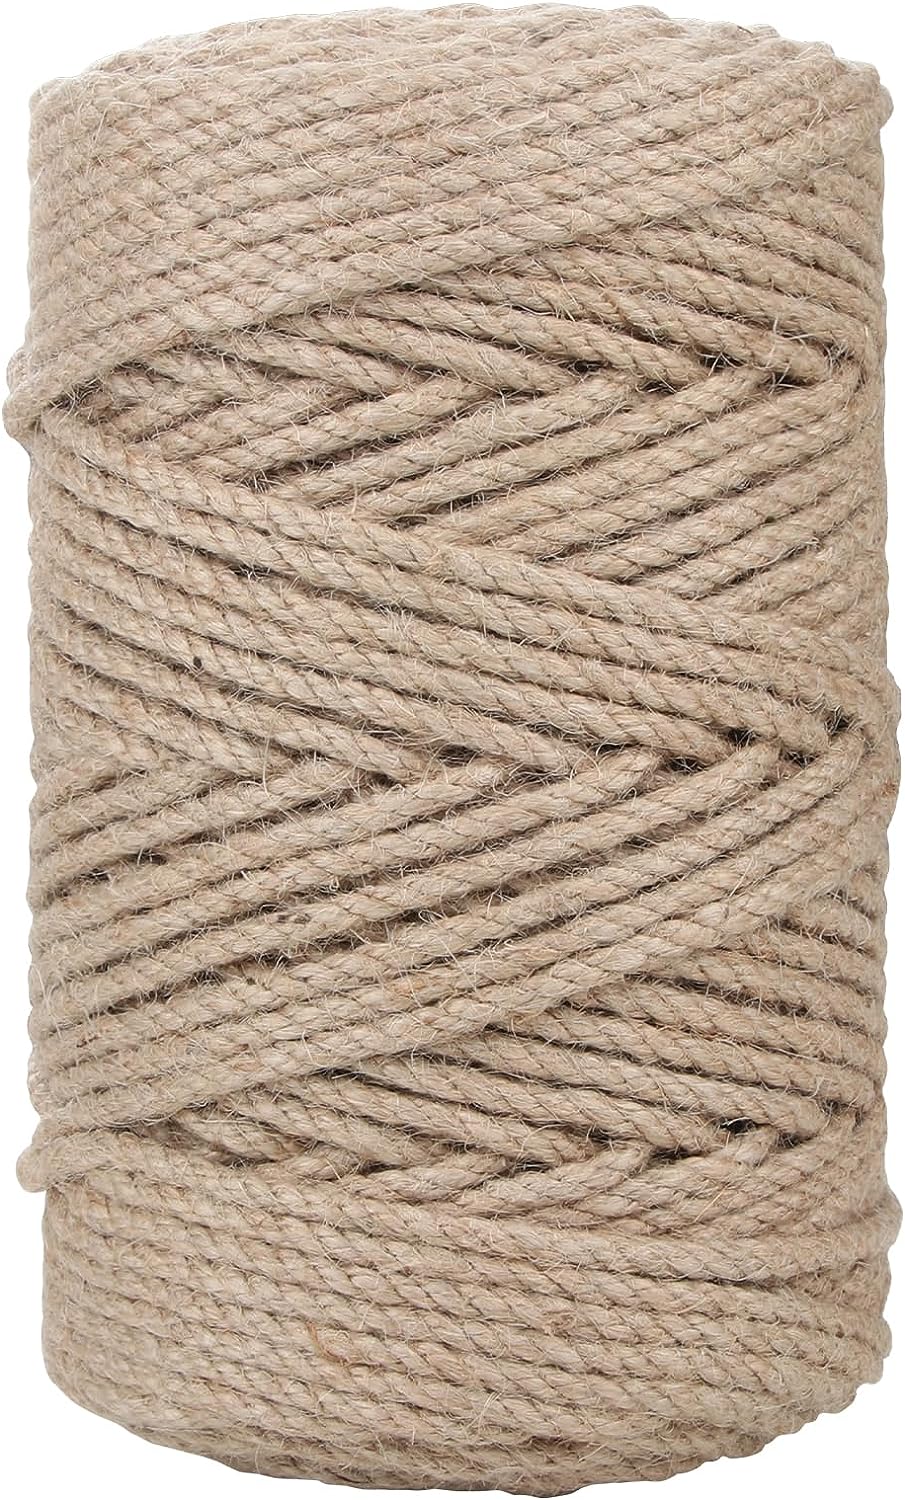 Natural Hemp Colored String Colorful 12 Variety Pack; Beautiful Twine for Arts Crafts 32ft per Color